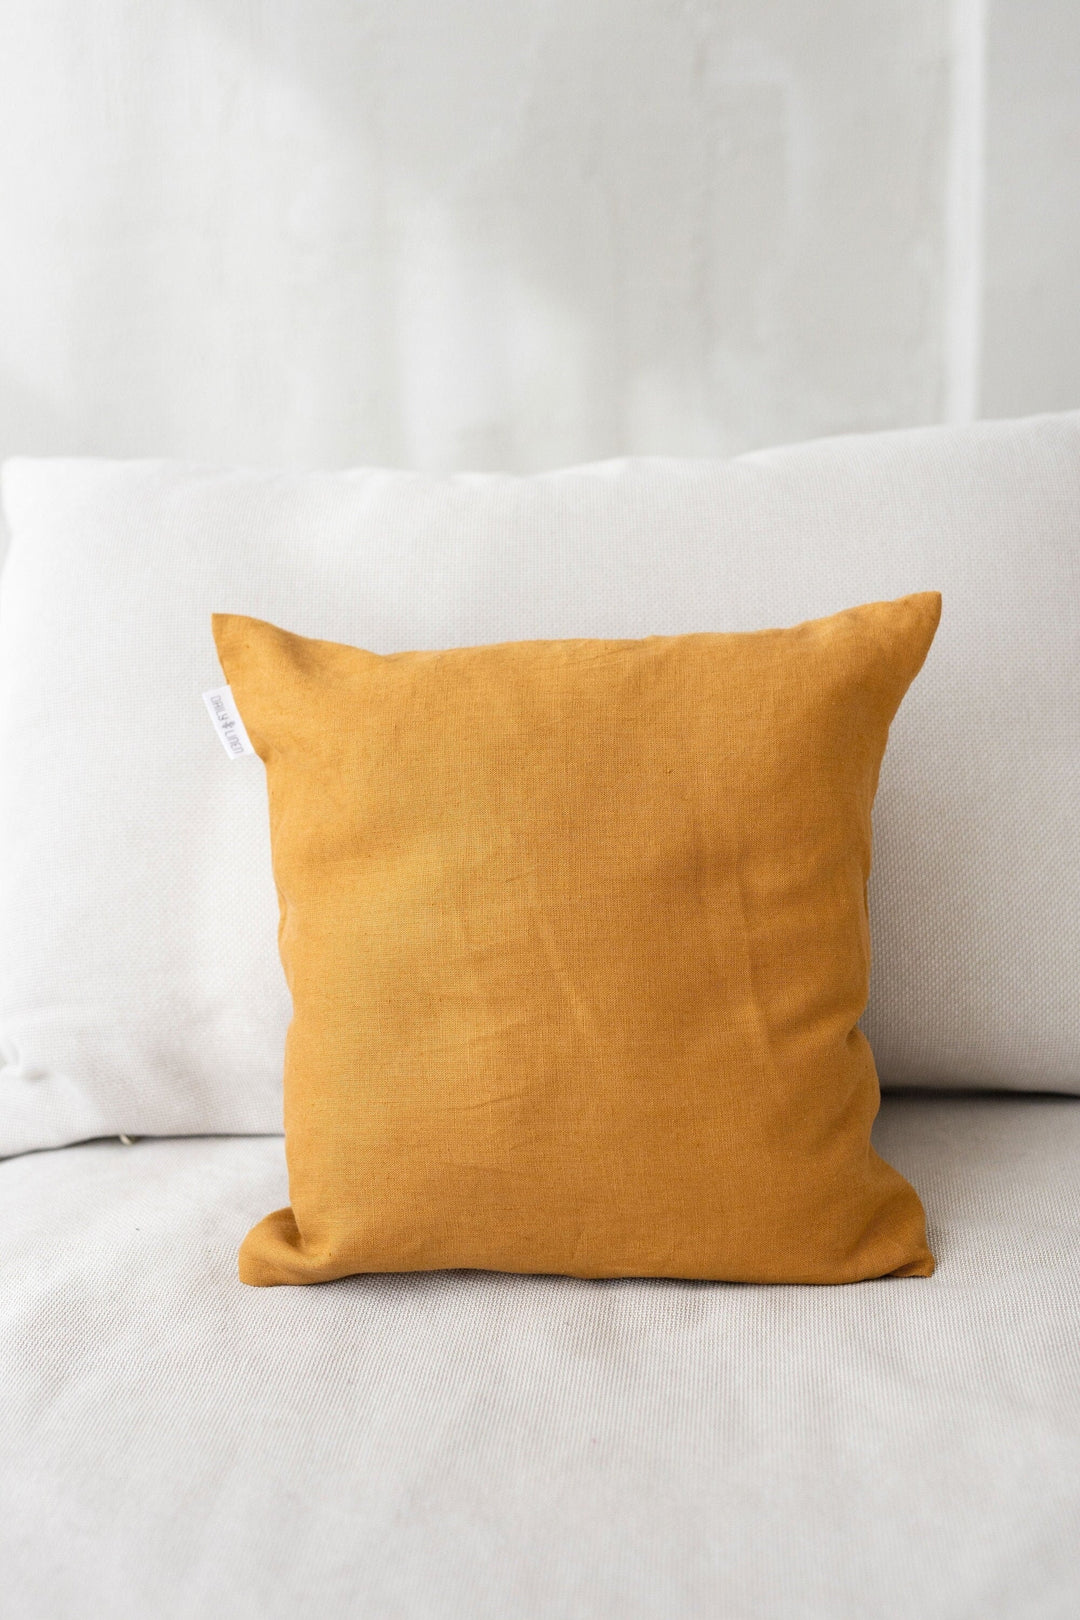 Deco Pillow Cover In Amber Yellow Color